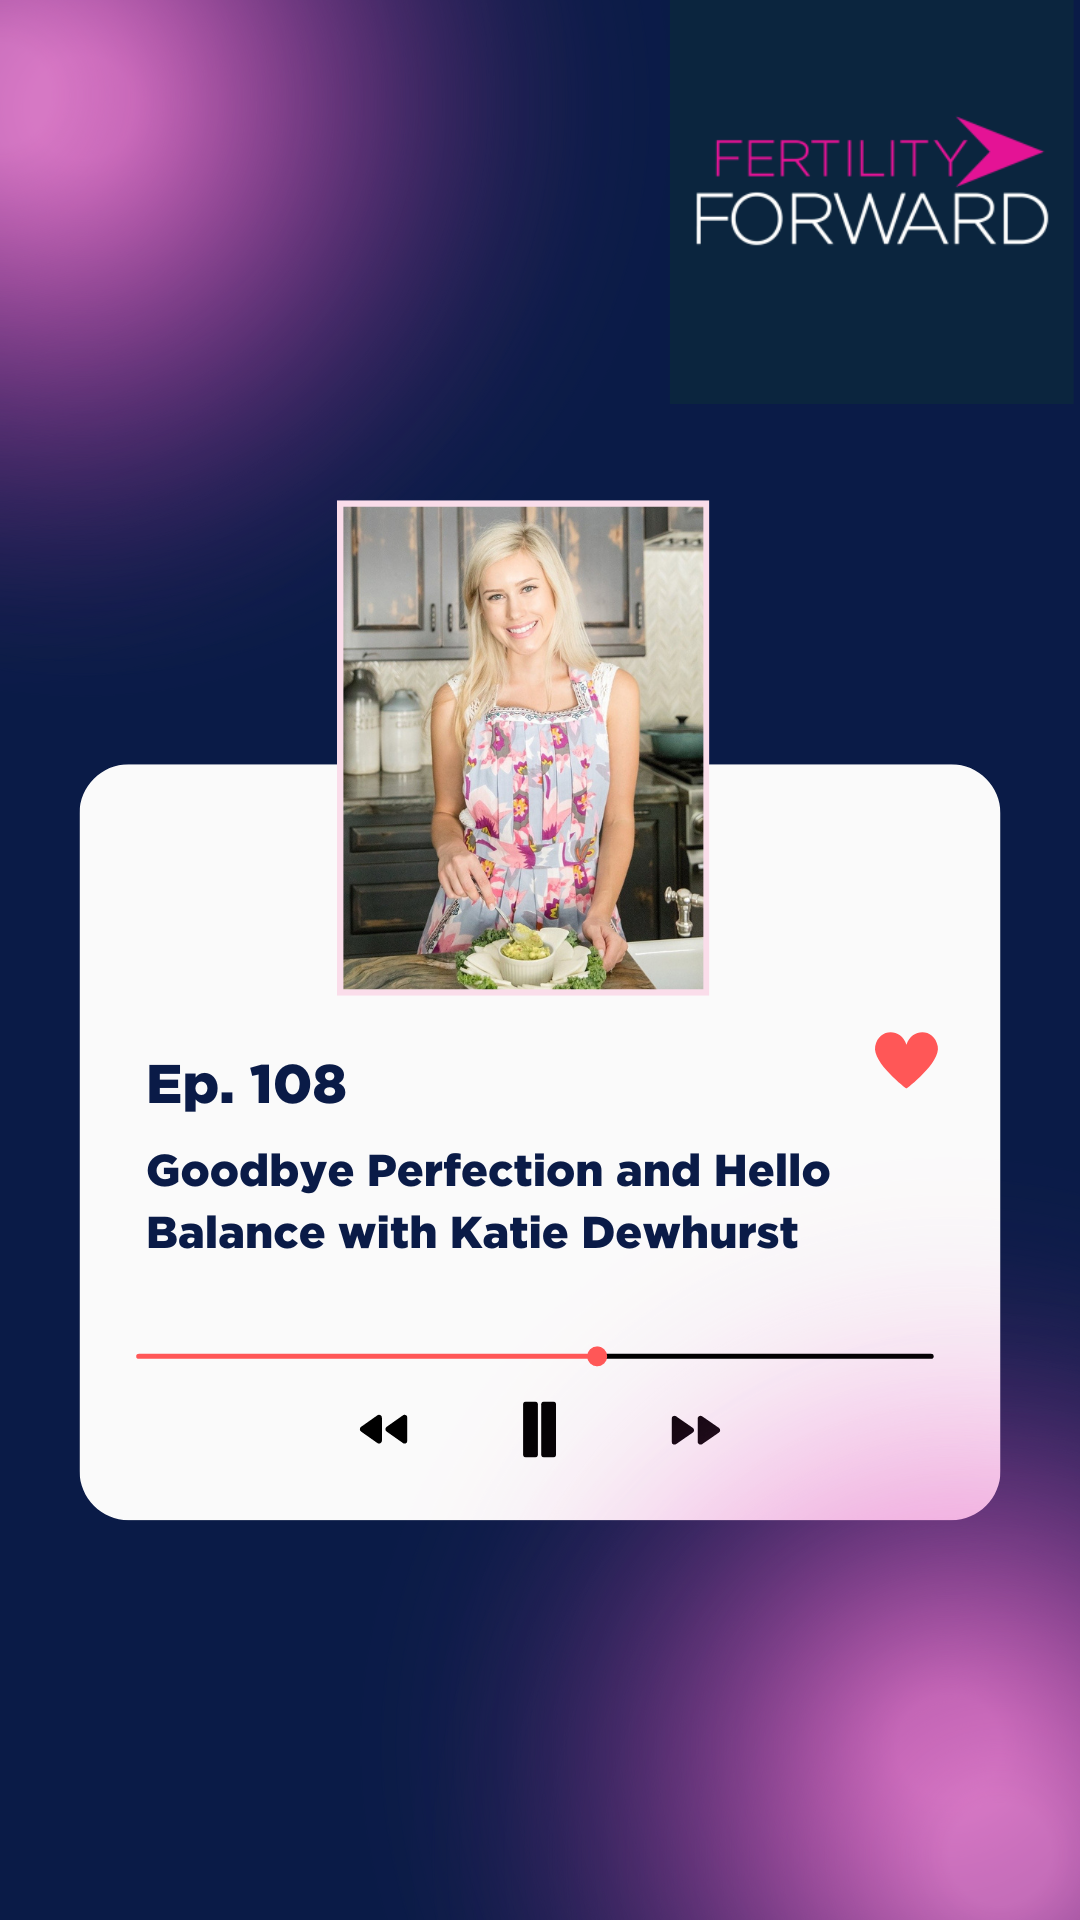 Ep 108: Goodbye Perfection and Hello Balance, with Katie Dewhurst